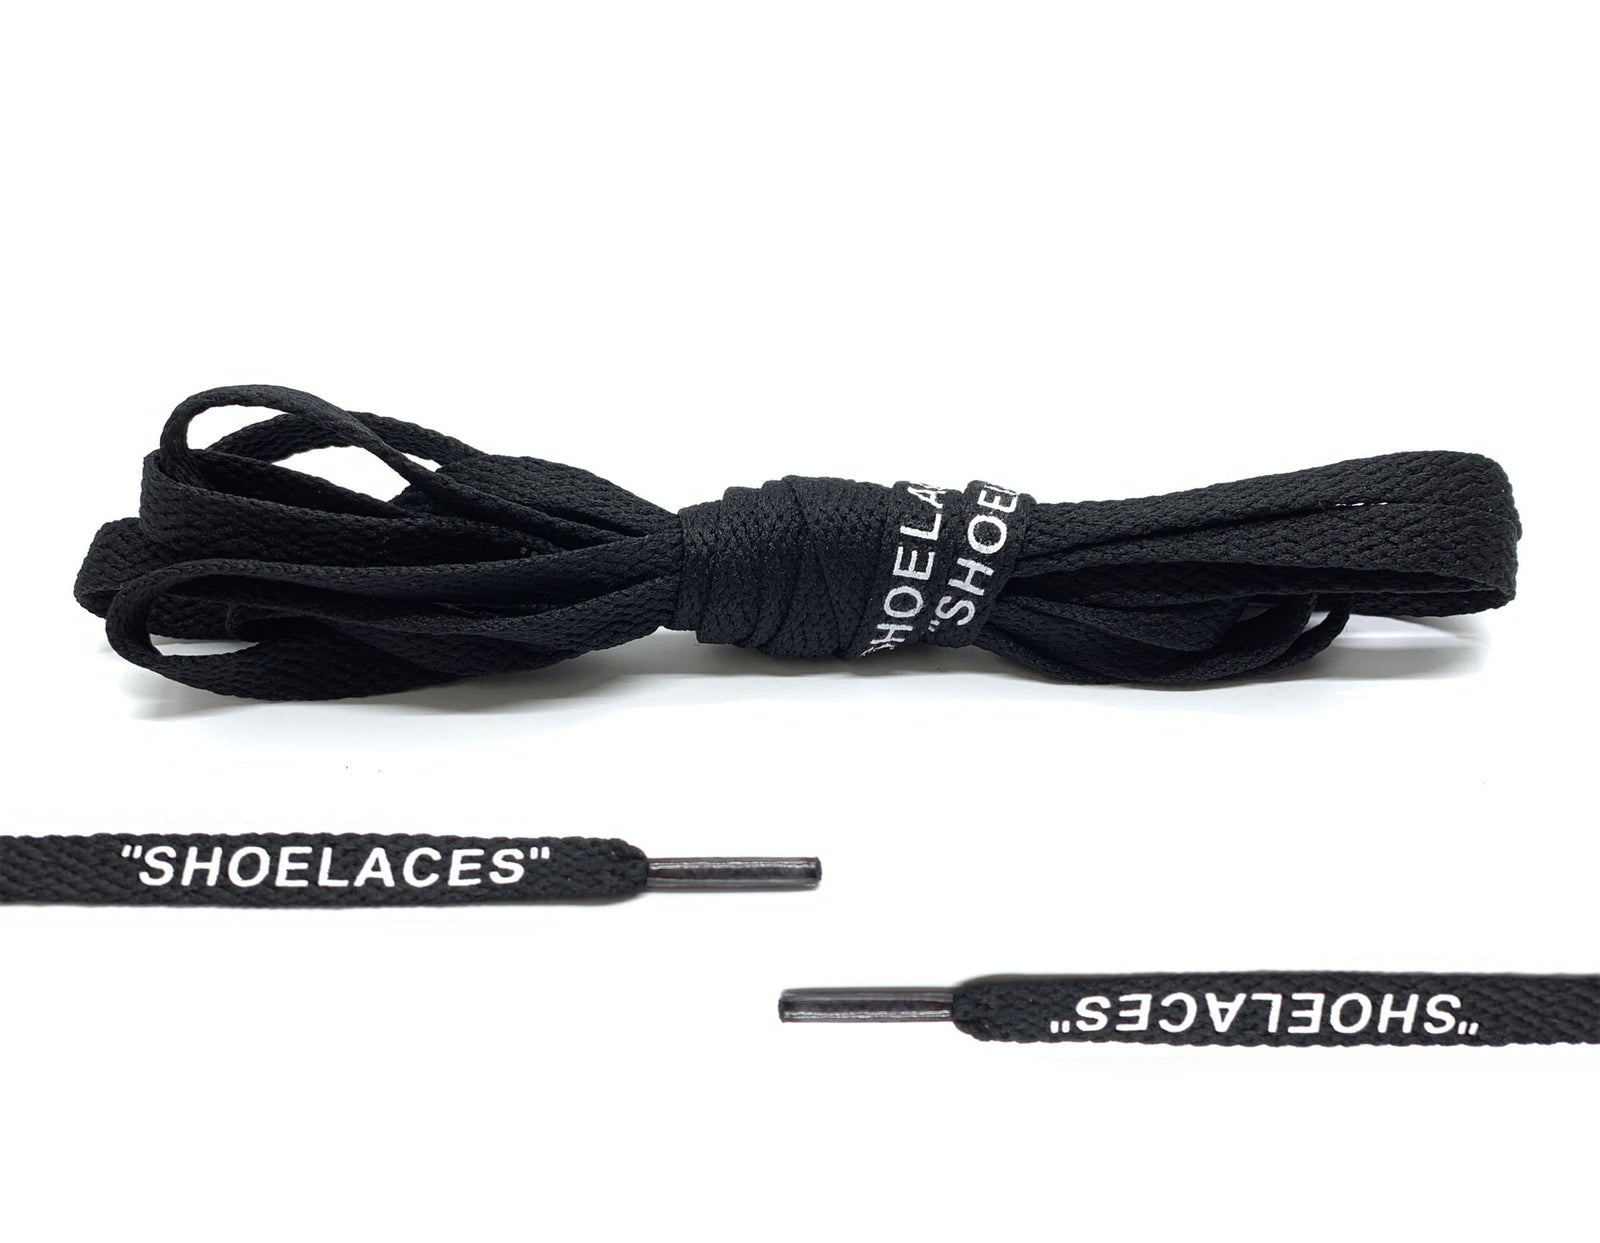 OFF-WHITE Shoelaces - Belaced